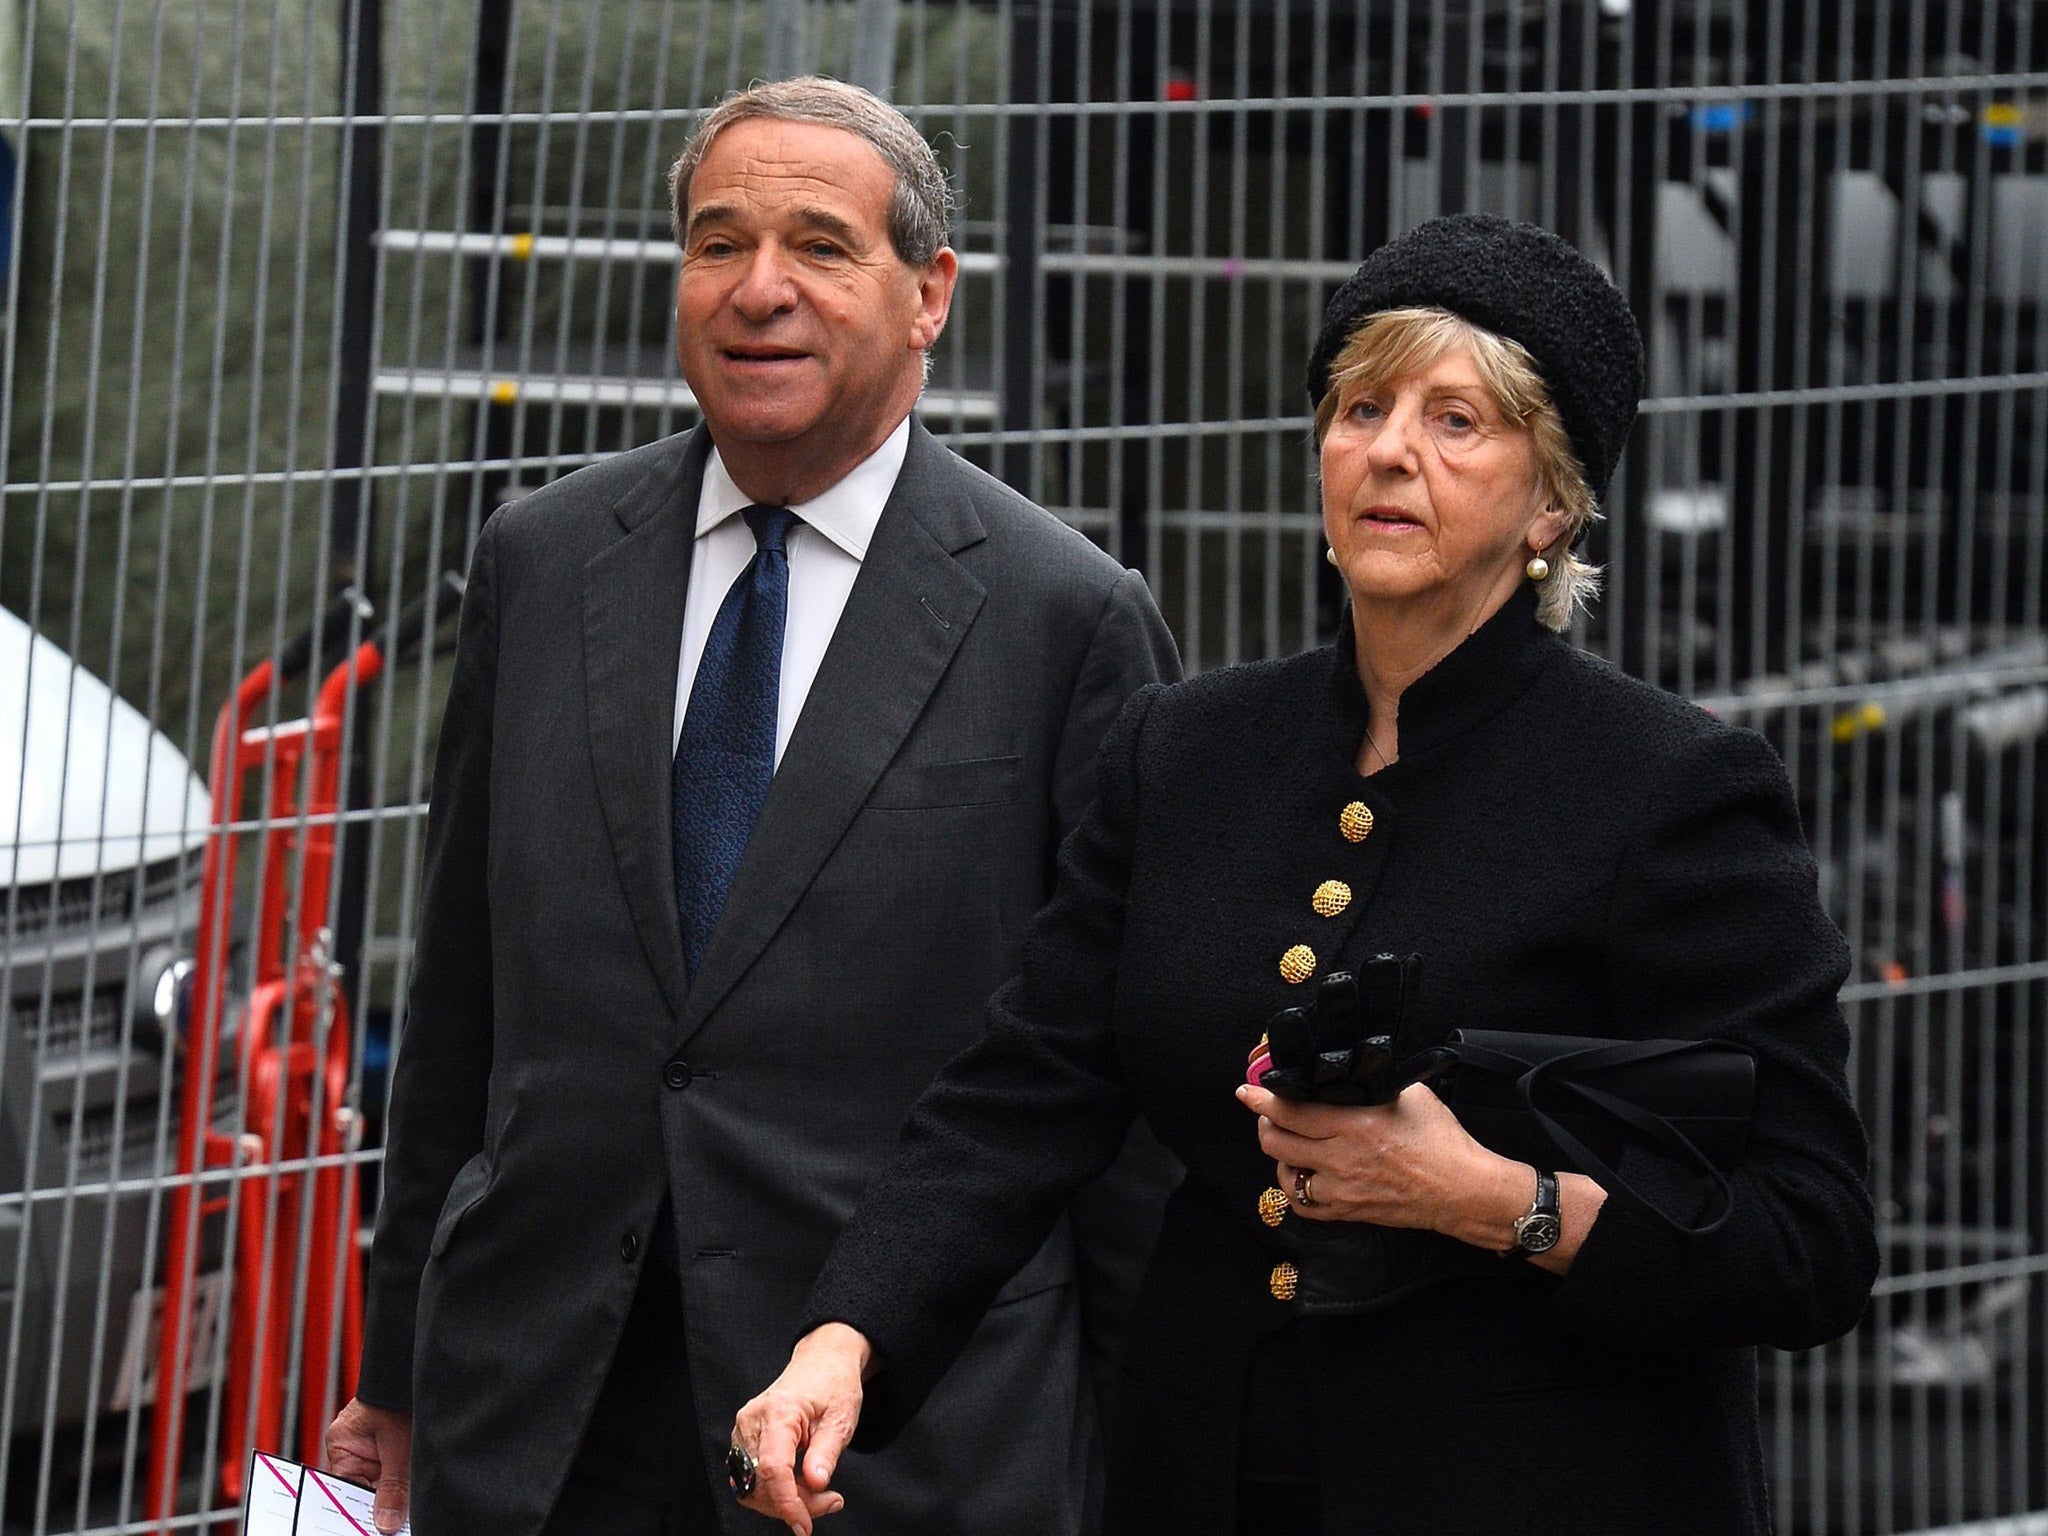 Former Cabinet minister Leon Brittan attends the Ceremonial funeral of former British Prime Minister Baroness Thatcher at St Paul's Cathedral